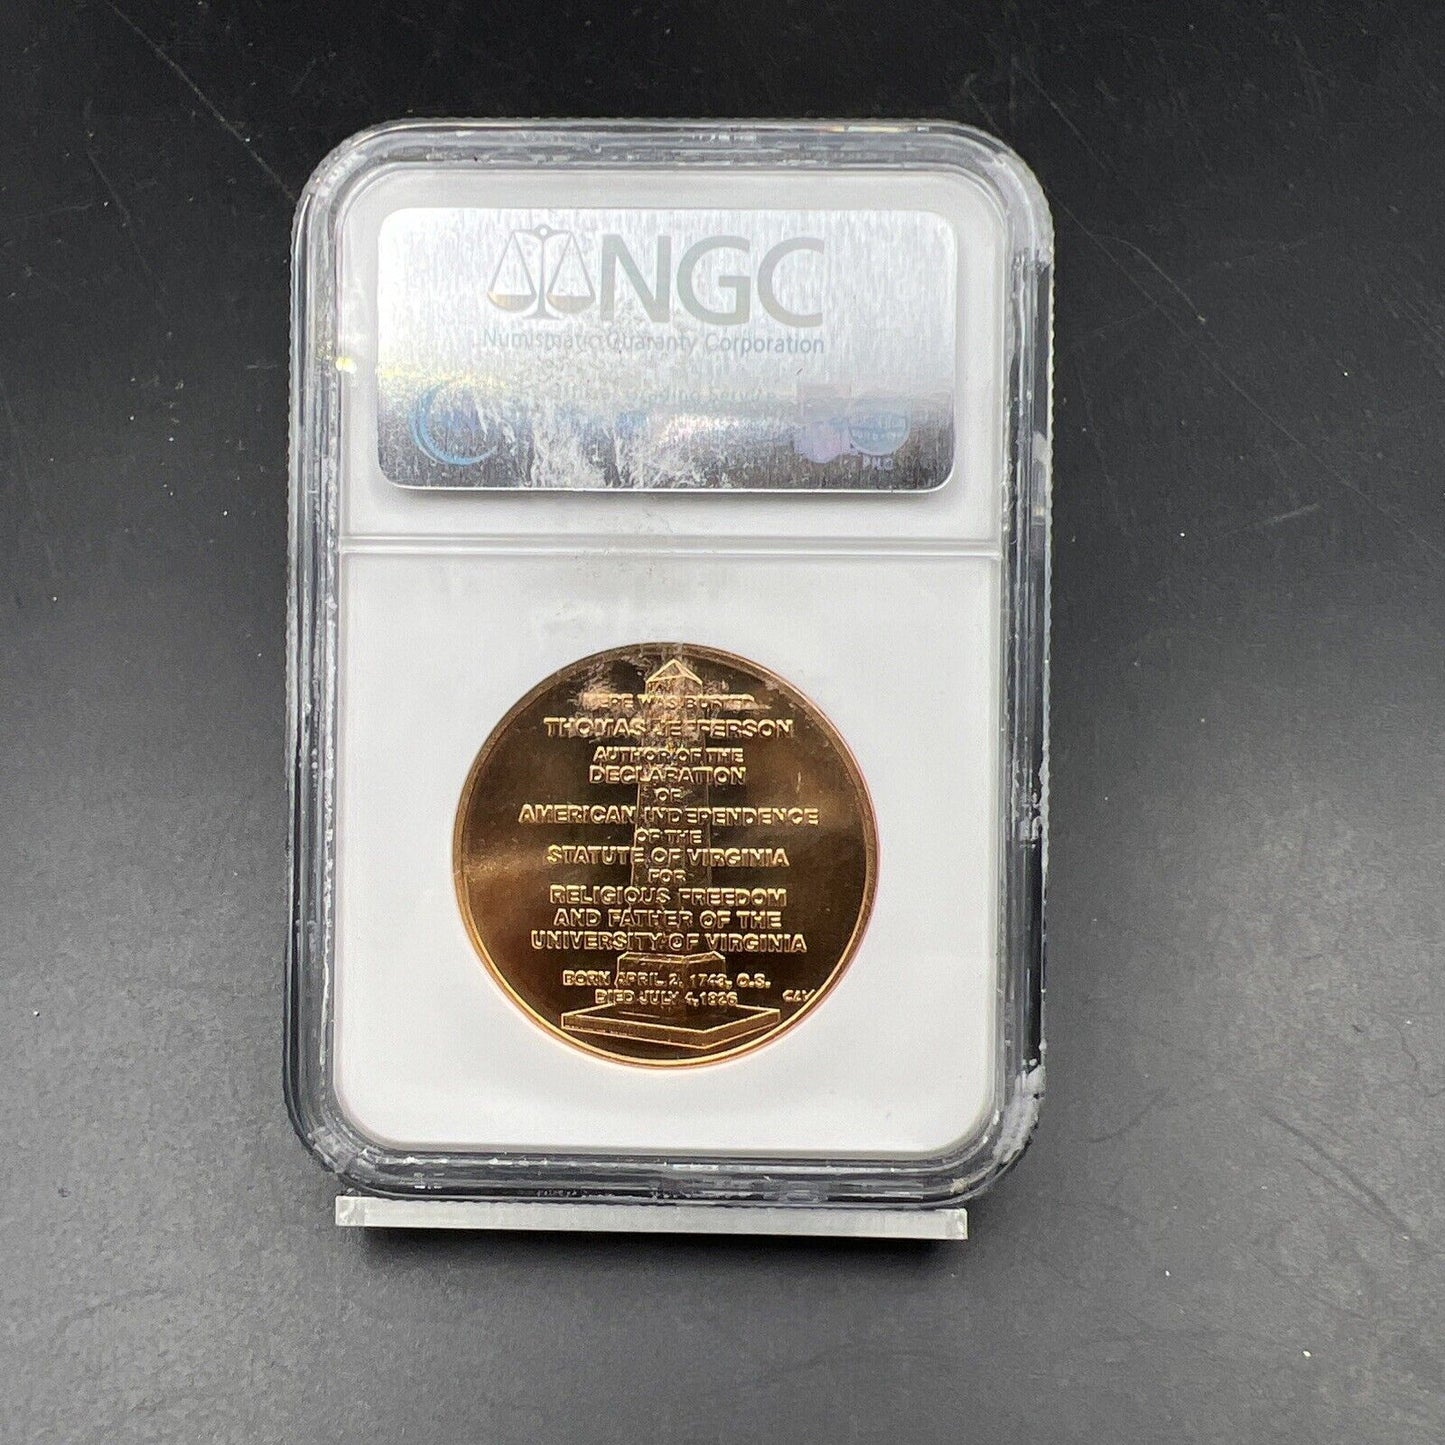 2007 NGC BU certified Bronze Medal First Spouse Series Jefferson's Liberty